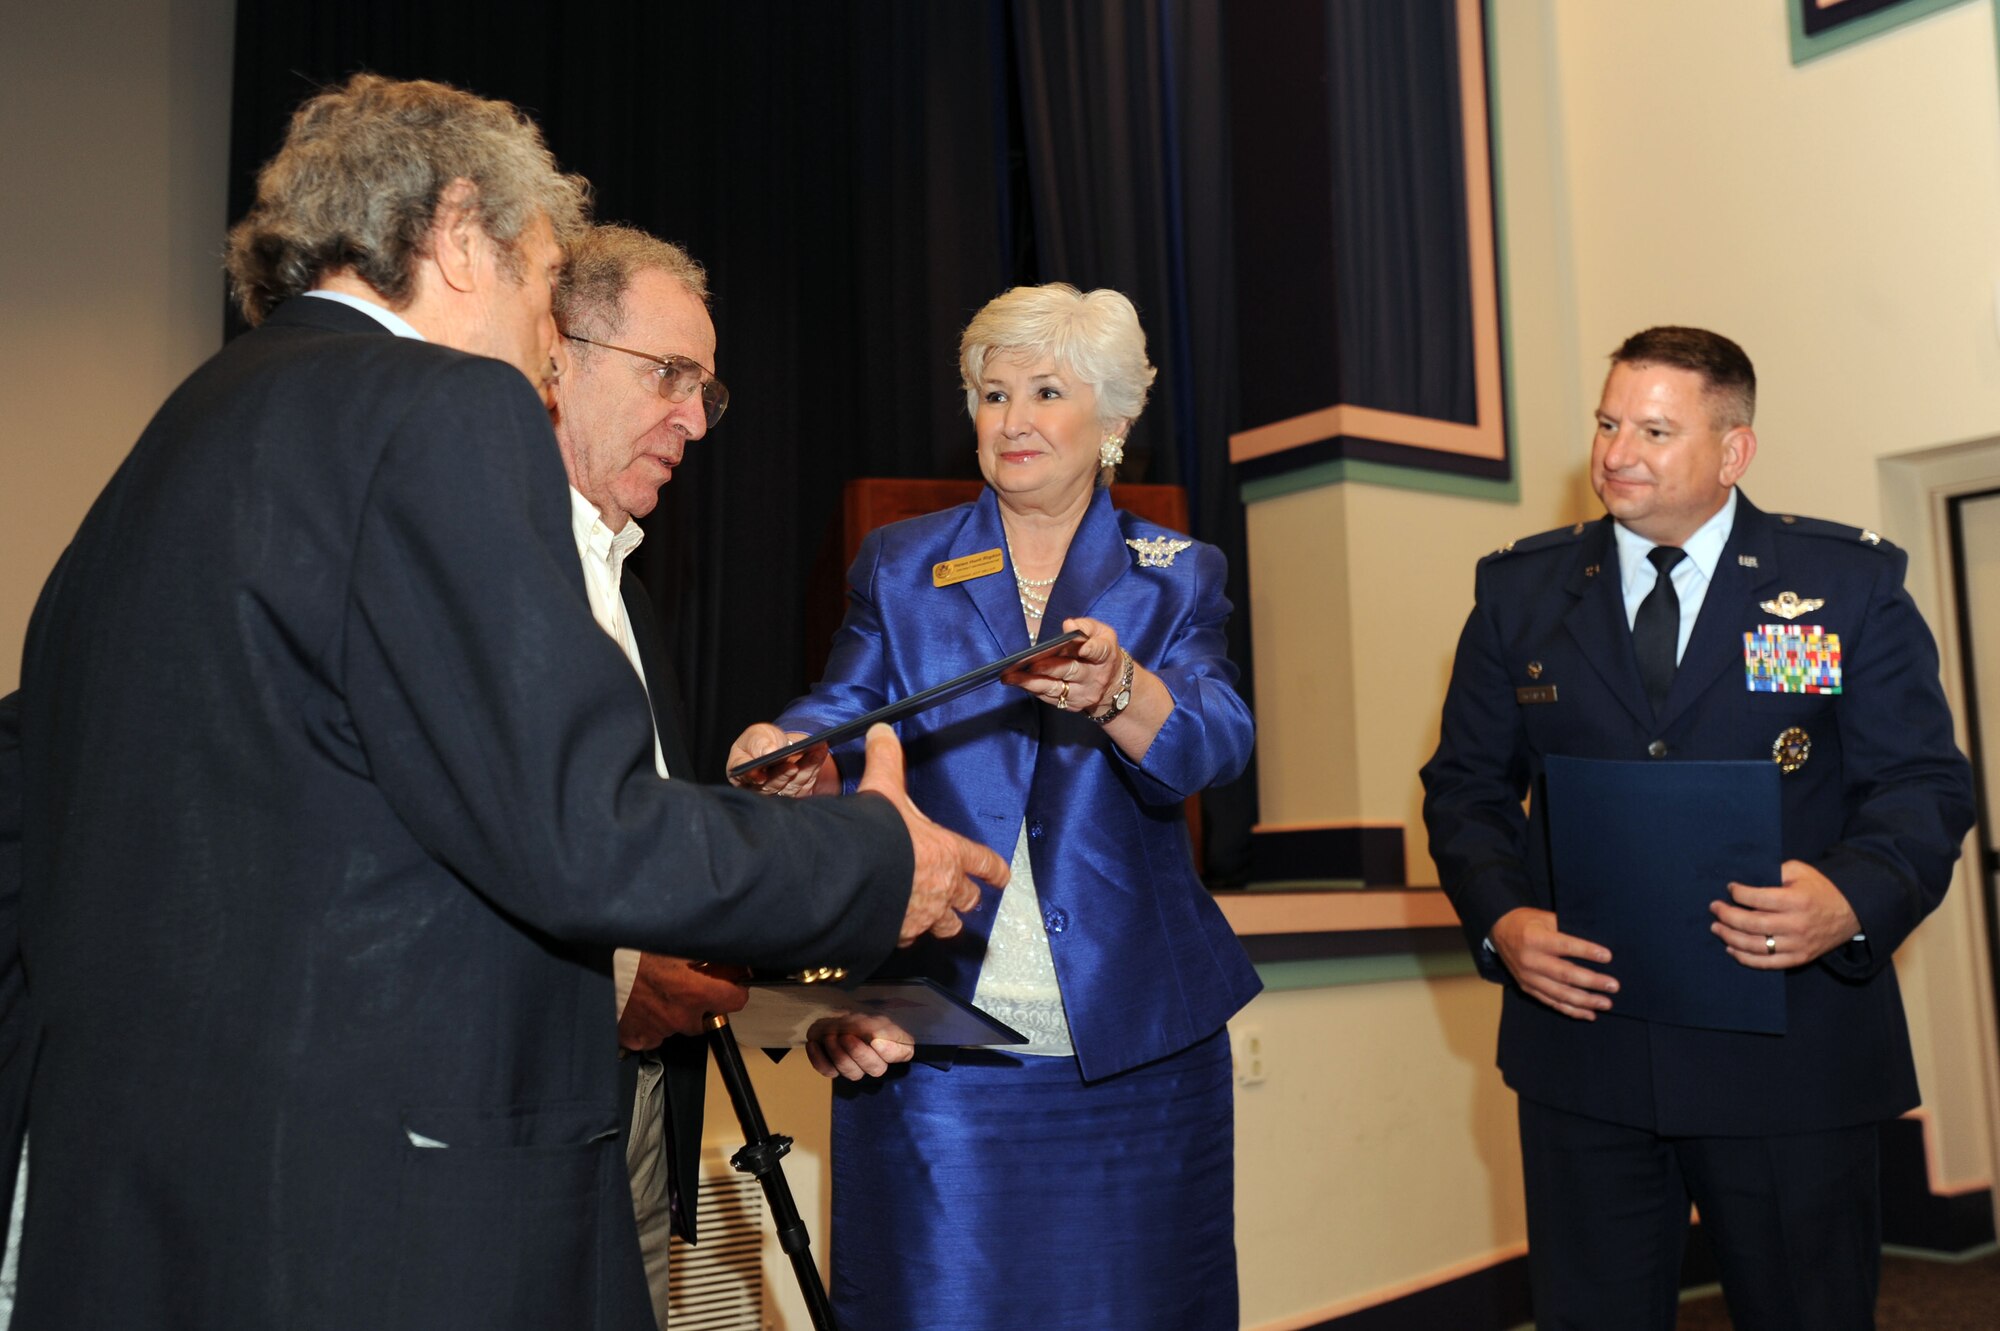 Helen Hunt Rigdon, representing Congressman Jeff Miller, and 505th Command and Control Wing Commander Col. Edward McKinzie present certificates of appreciation to Herman Snyder (left) and Dr. Victor Sapio (second from left) for participating in Hurlburt Field's Annual Holocaust Remembrance Ceremony May 4. The event was hosted by the 505th CCW on behalf of the 1st Special Operations Wing. The theme of this year's observance is "Stories of Freedom: What You Do Matters." (U.S. Air Force Photo by Senior Airman Matthew R. Loken)